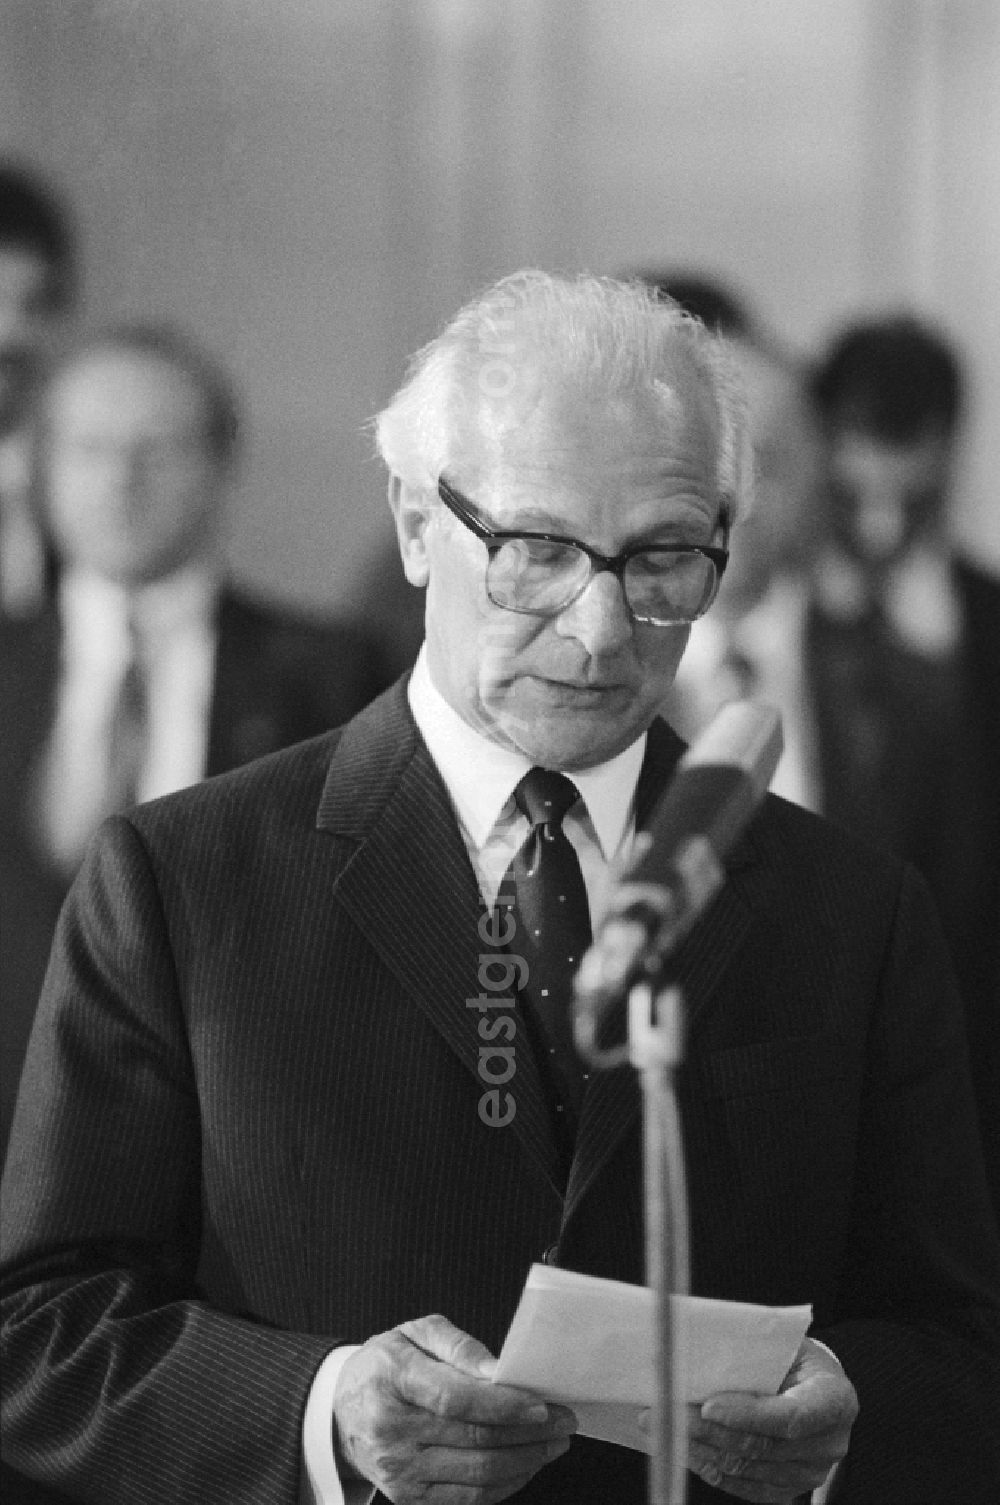 GDR picture archive: Prag - Erich Honecker (1912 - 1994), general secretary of the Central Committee of the SED Central Committee Socialist Unity Party and Chairman of the State Council official visit during a state visit in Prague in Czechoslovakia / Czech Republic